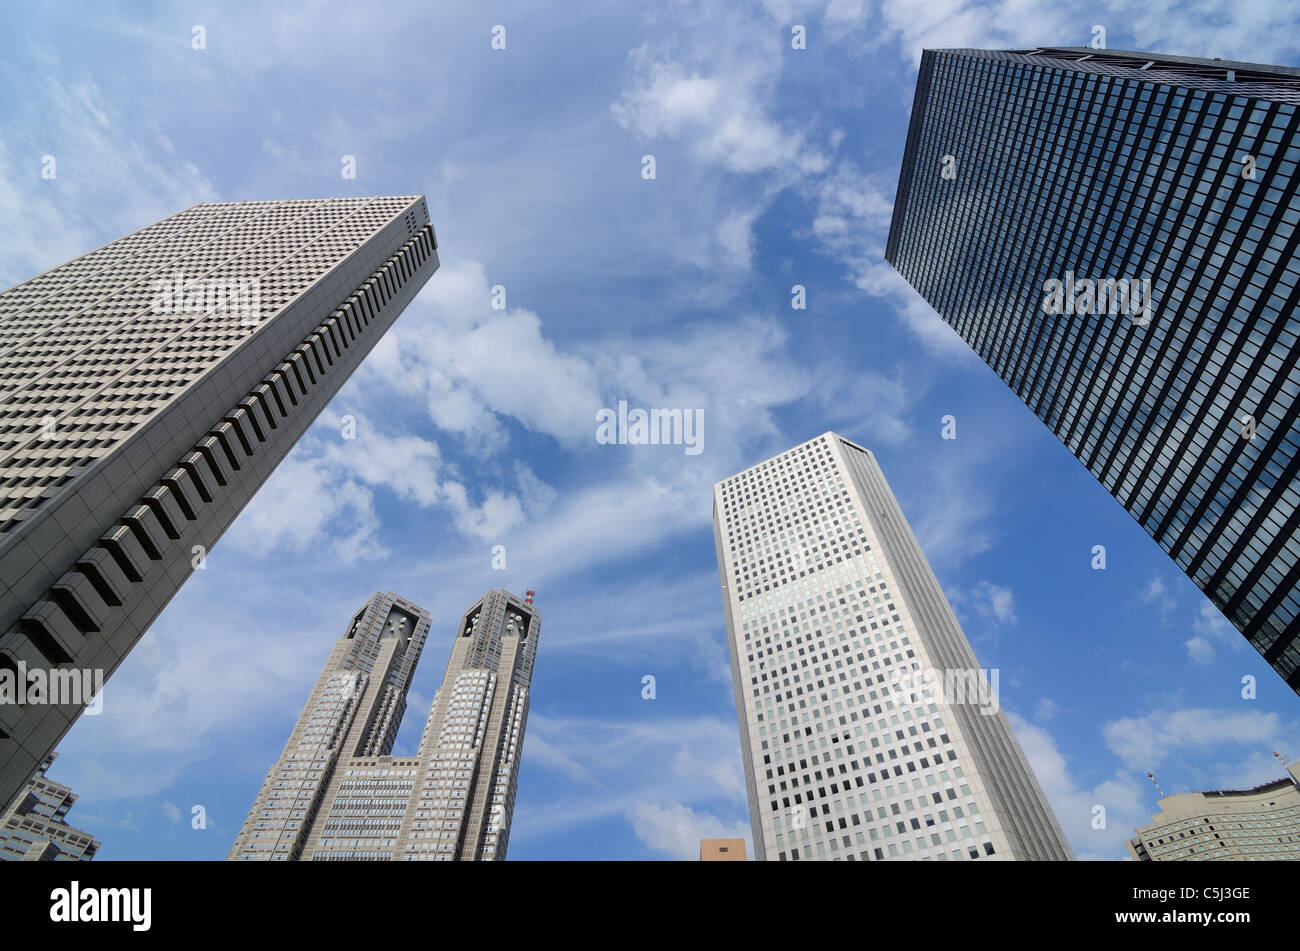 Cityscape of government buildings in Shunjuku, Tokyo, Japan including the Tokyo Metropolitan Government Building. Stock Photo